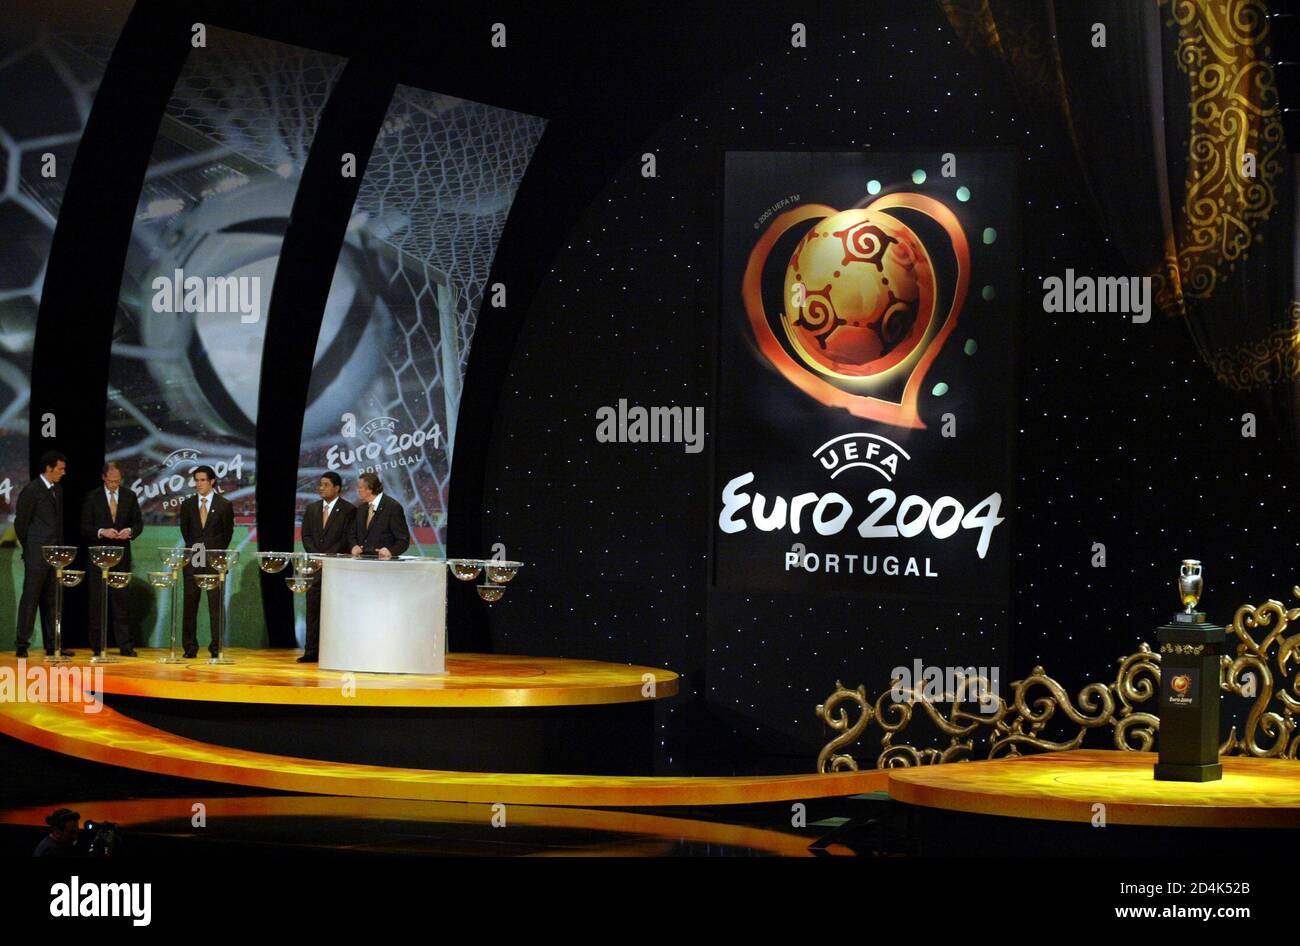 UEFA chief executive Gerhard Aigner (5l) conducts the draw for Euro 2004 in  the Atlantic pavillion in Lisbon November 30, 2003. The European soccer  championships will be staged in Portugal between June